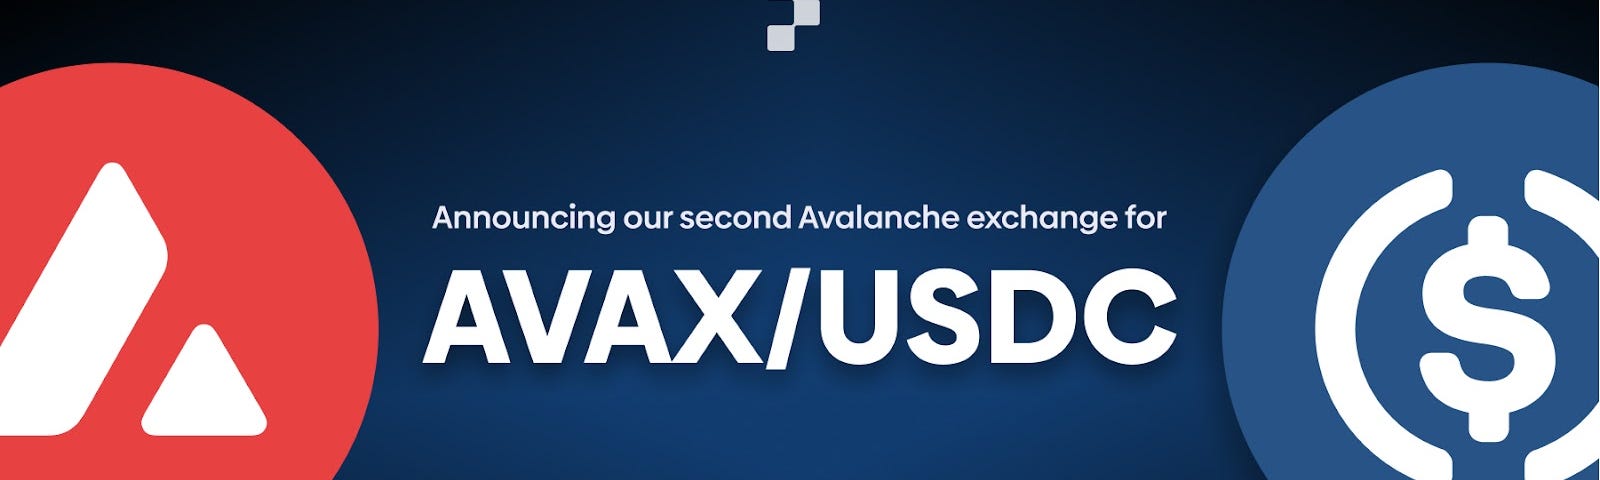 An announcement banner graphic showing the AVAX/USDC coin pairs with 10x leverage available and 500 in $FST weekly trading rewards